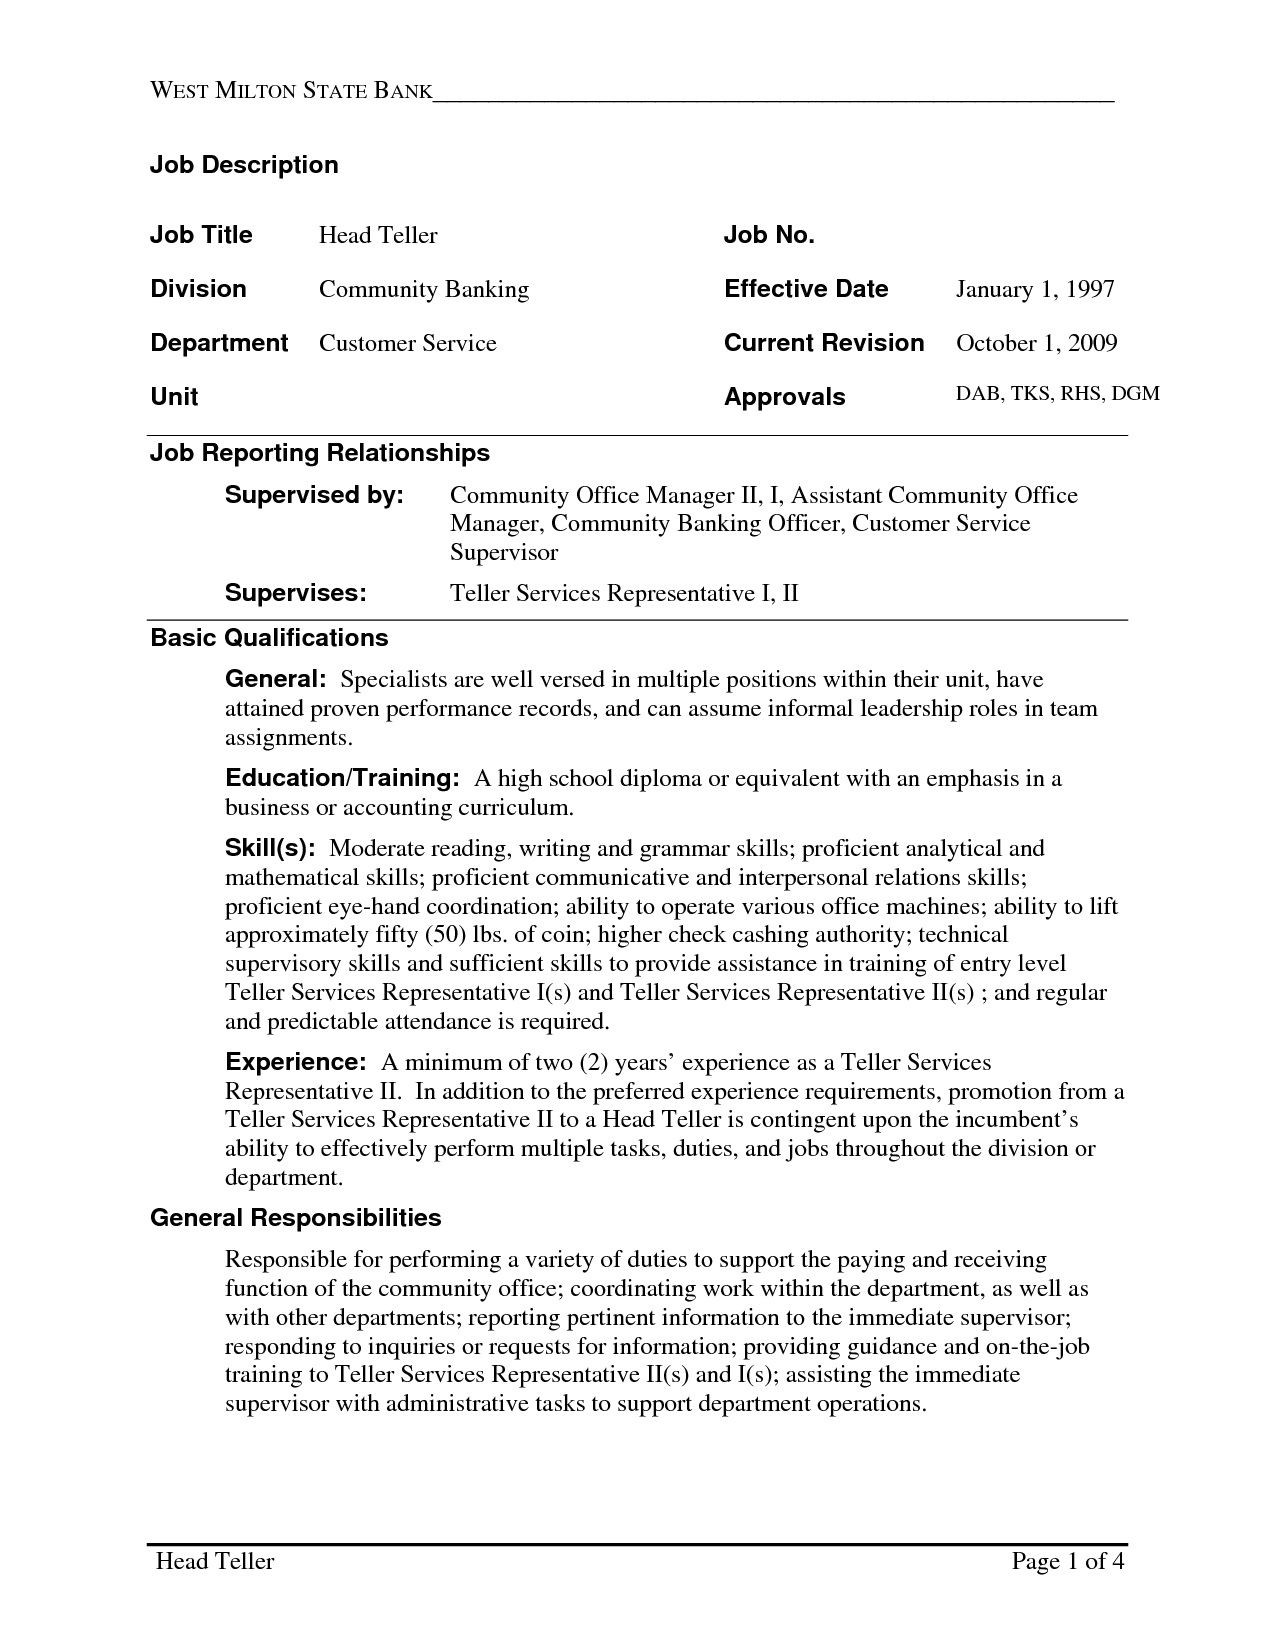 Sample Resume for Clerk with No Experience Bank Teller Resume with No Experience Latest Resume format